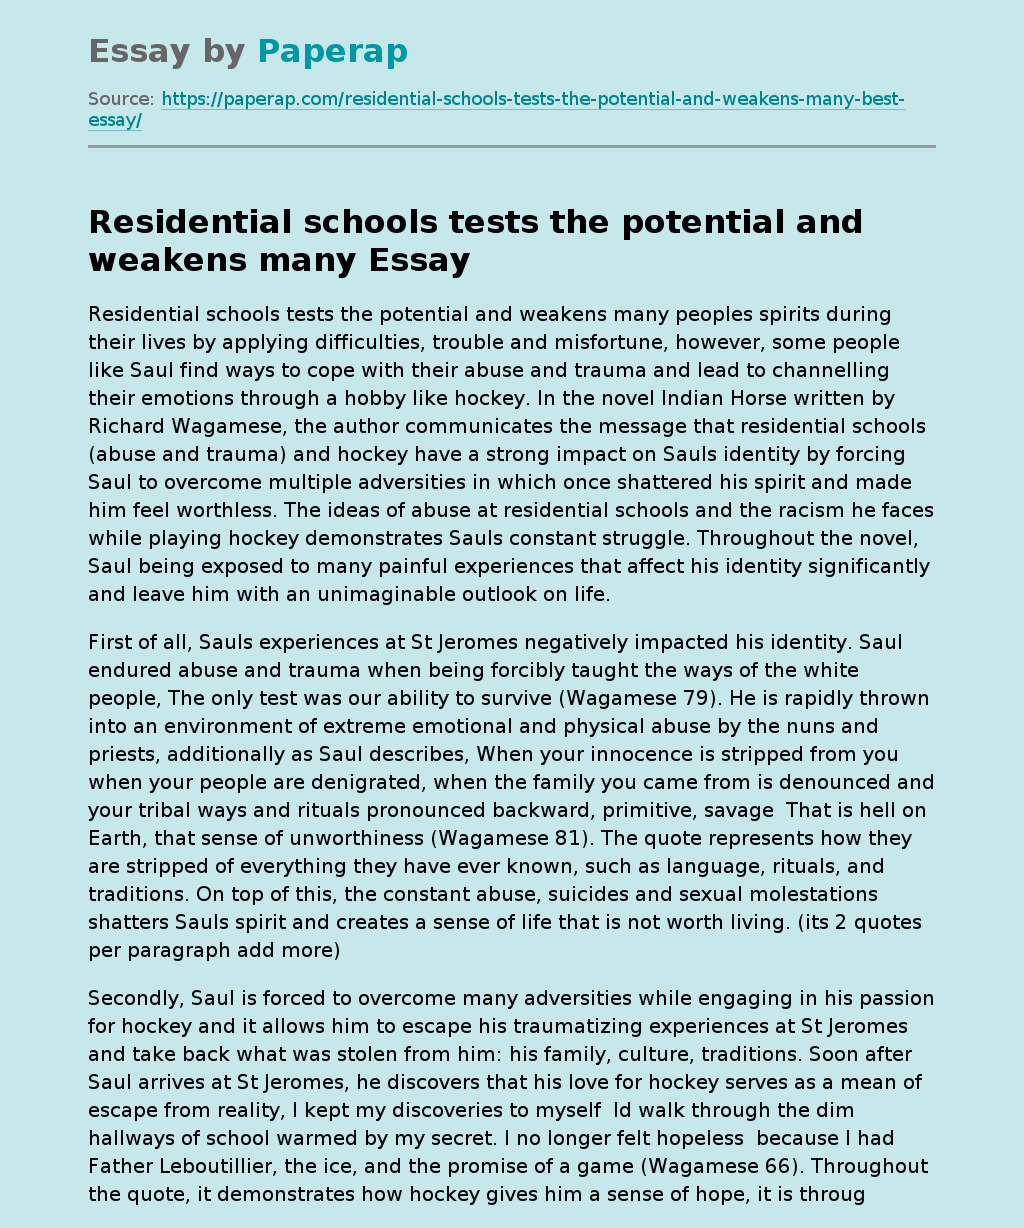 Residential schools tests the potential and weakens many